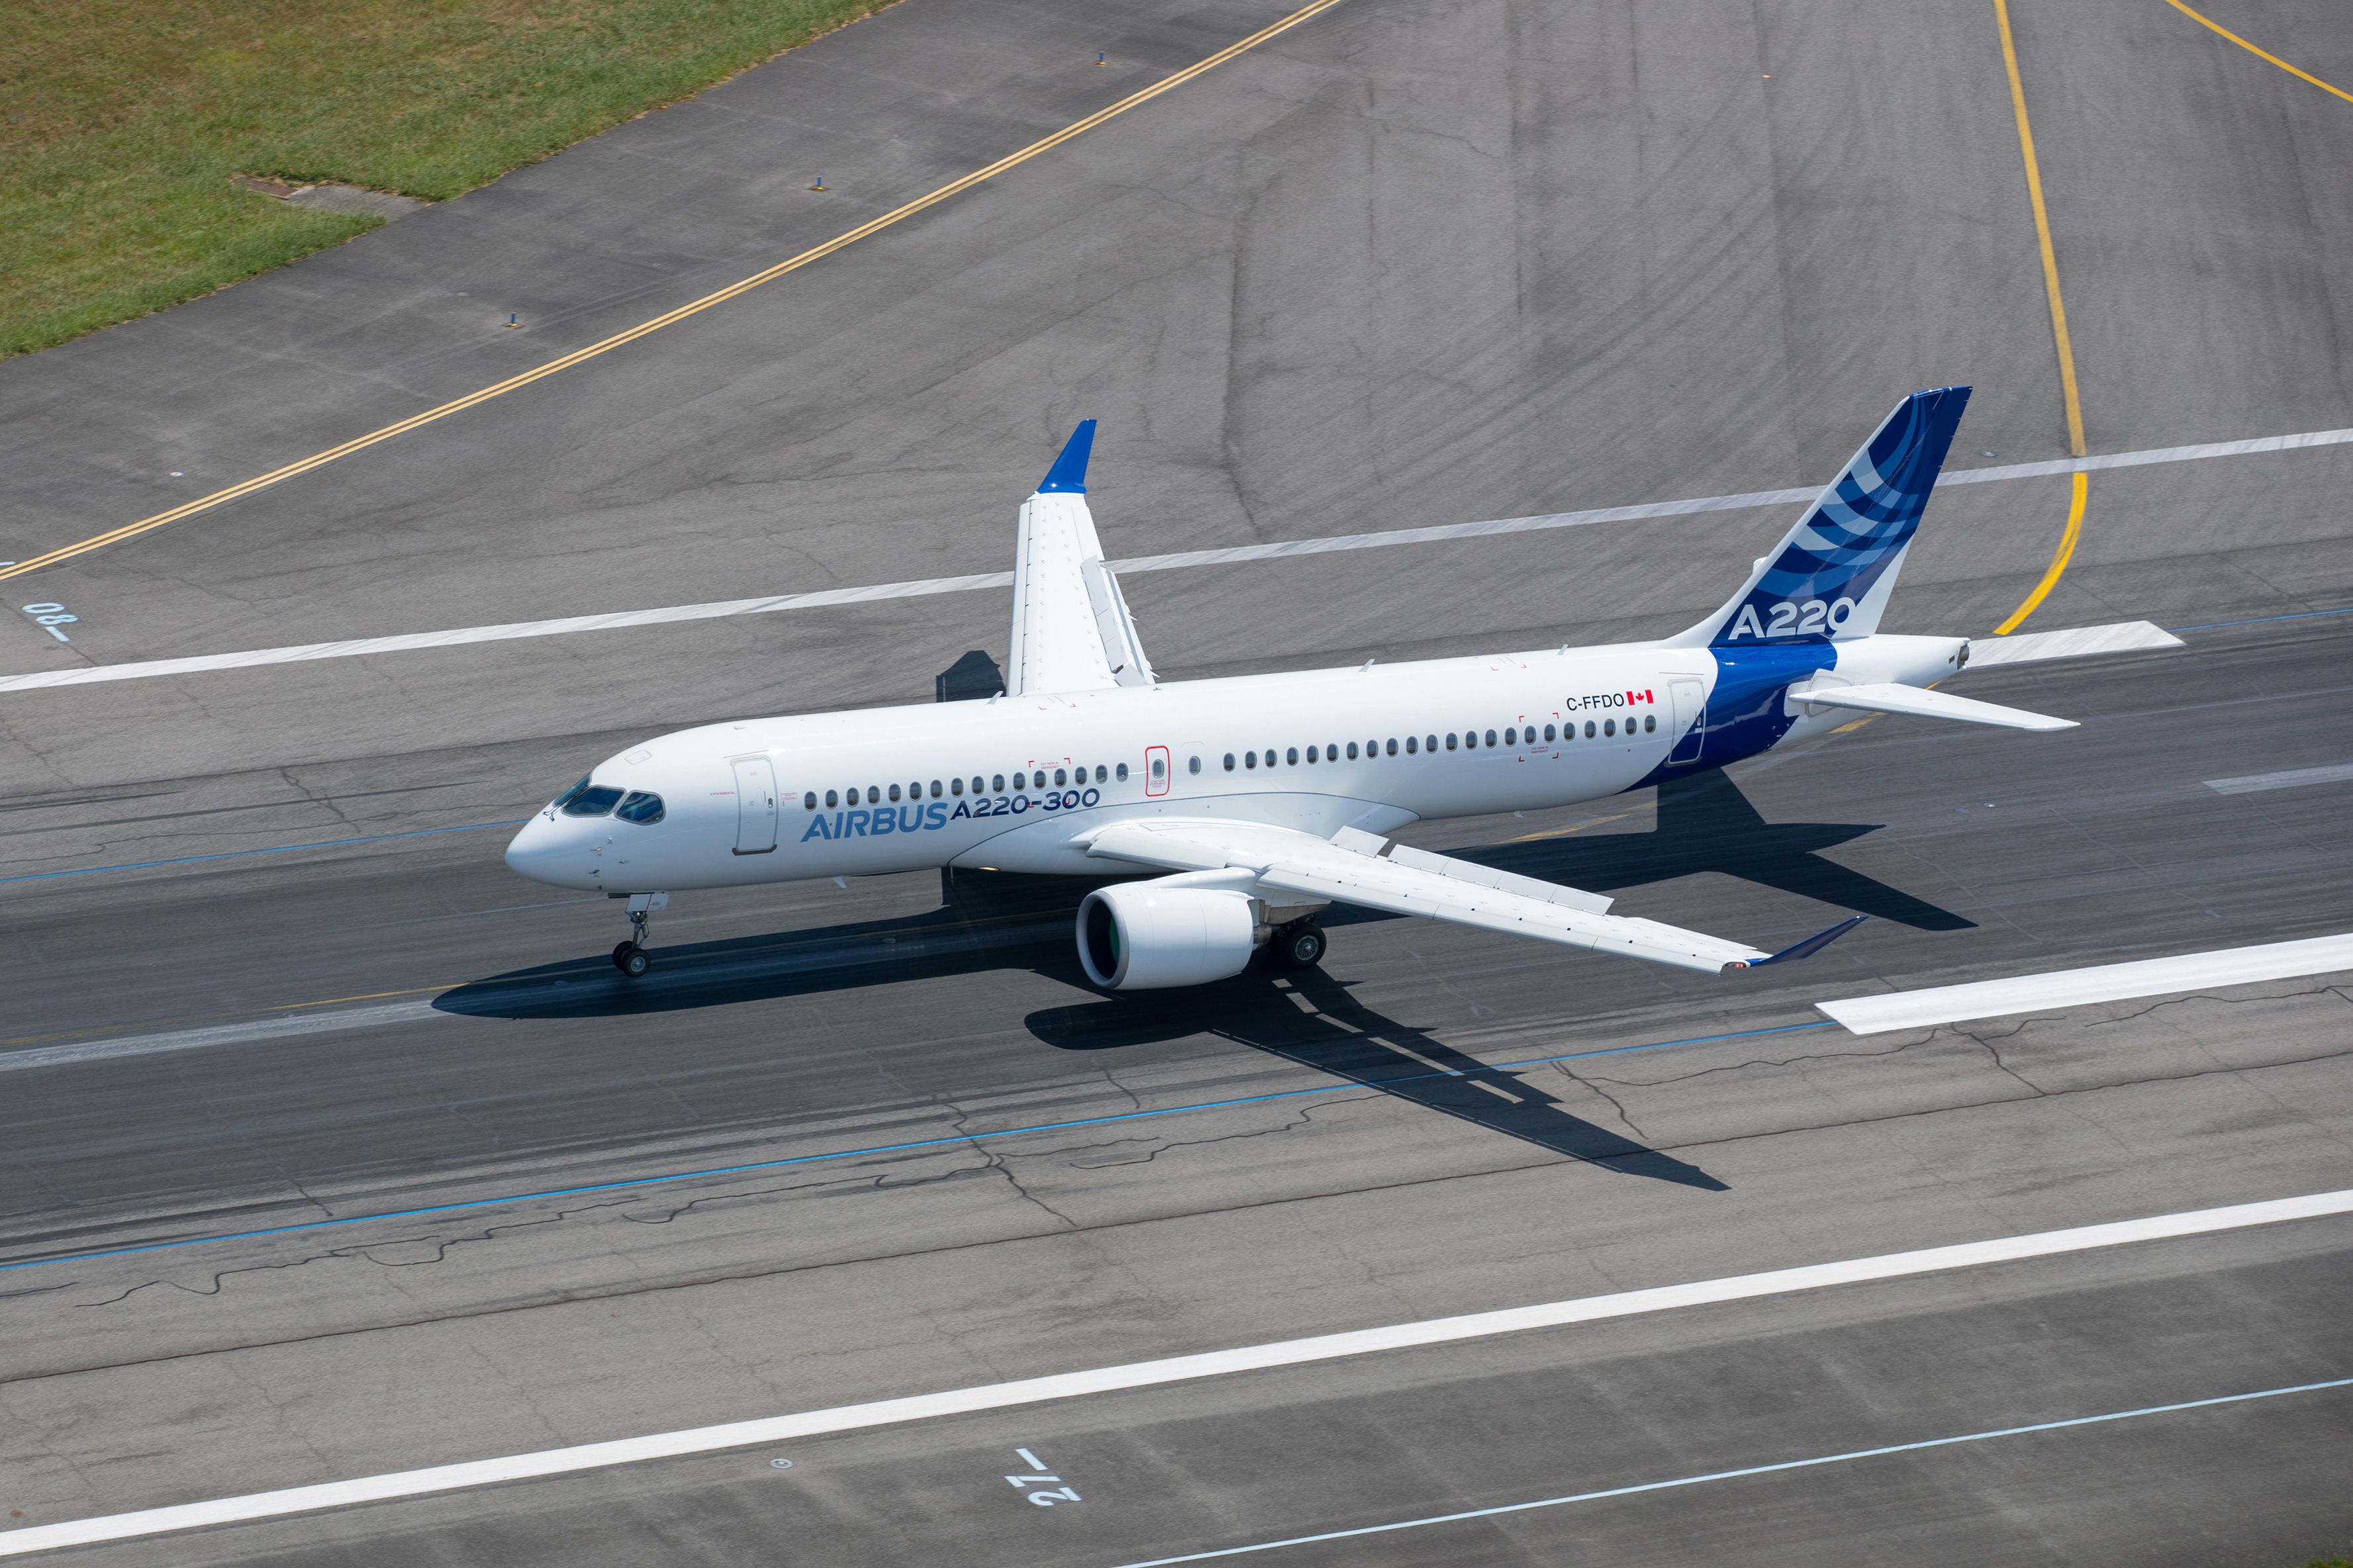 Airbus A220-300 new member of the airbus single aisle family - Landing